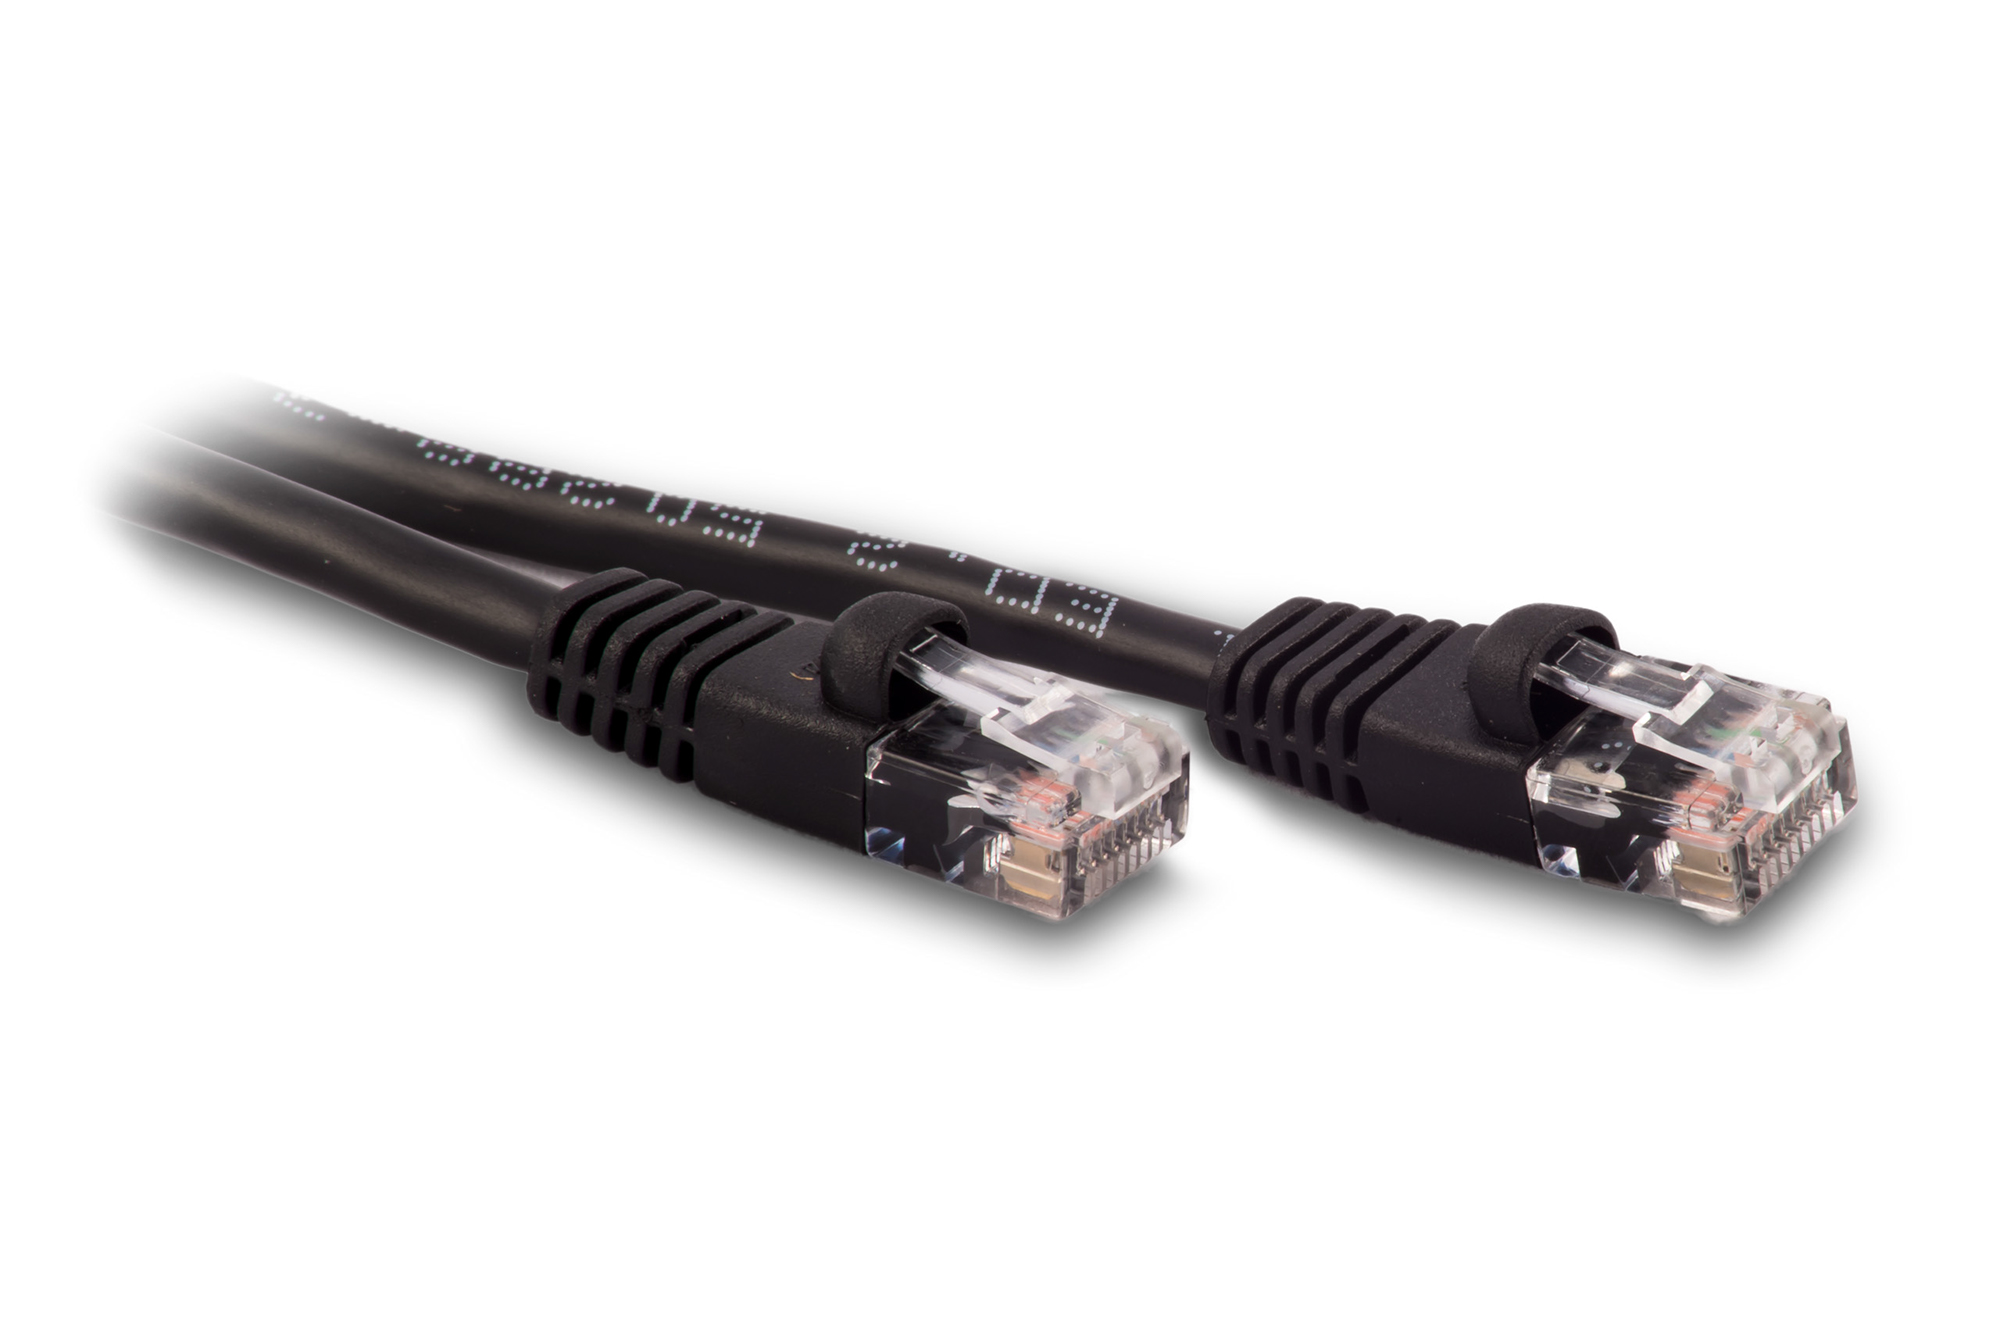 50ft Cat6 Ethernet Patch Cable - Black Color - Snagless Boot, Stranded, RJ45, 550Mhz, 24AWG